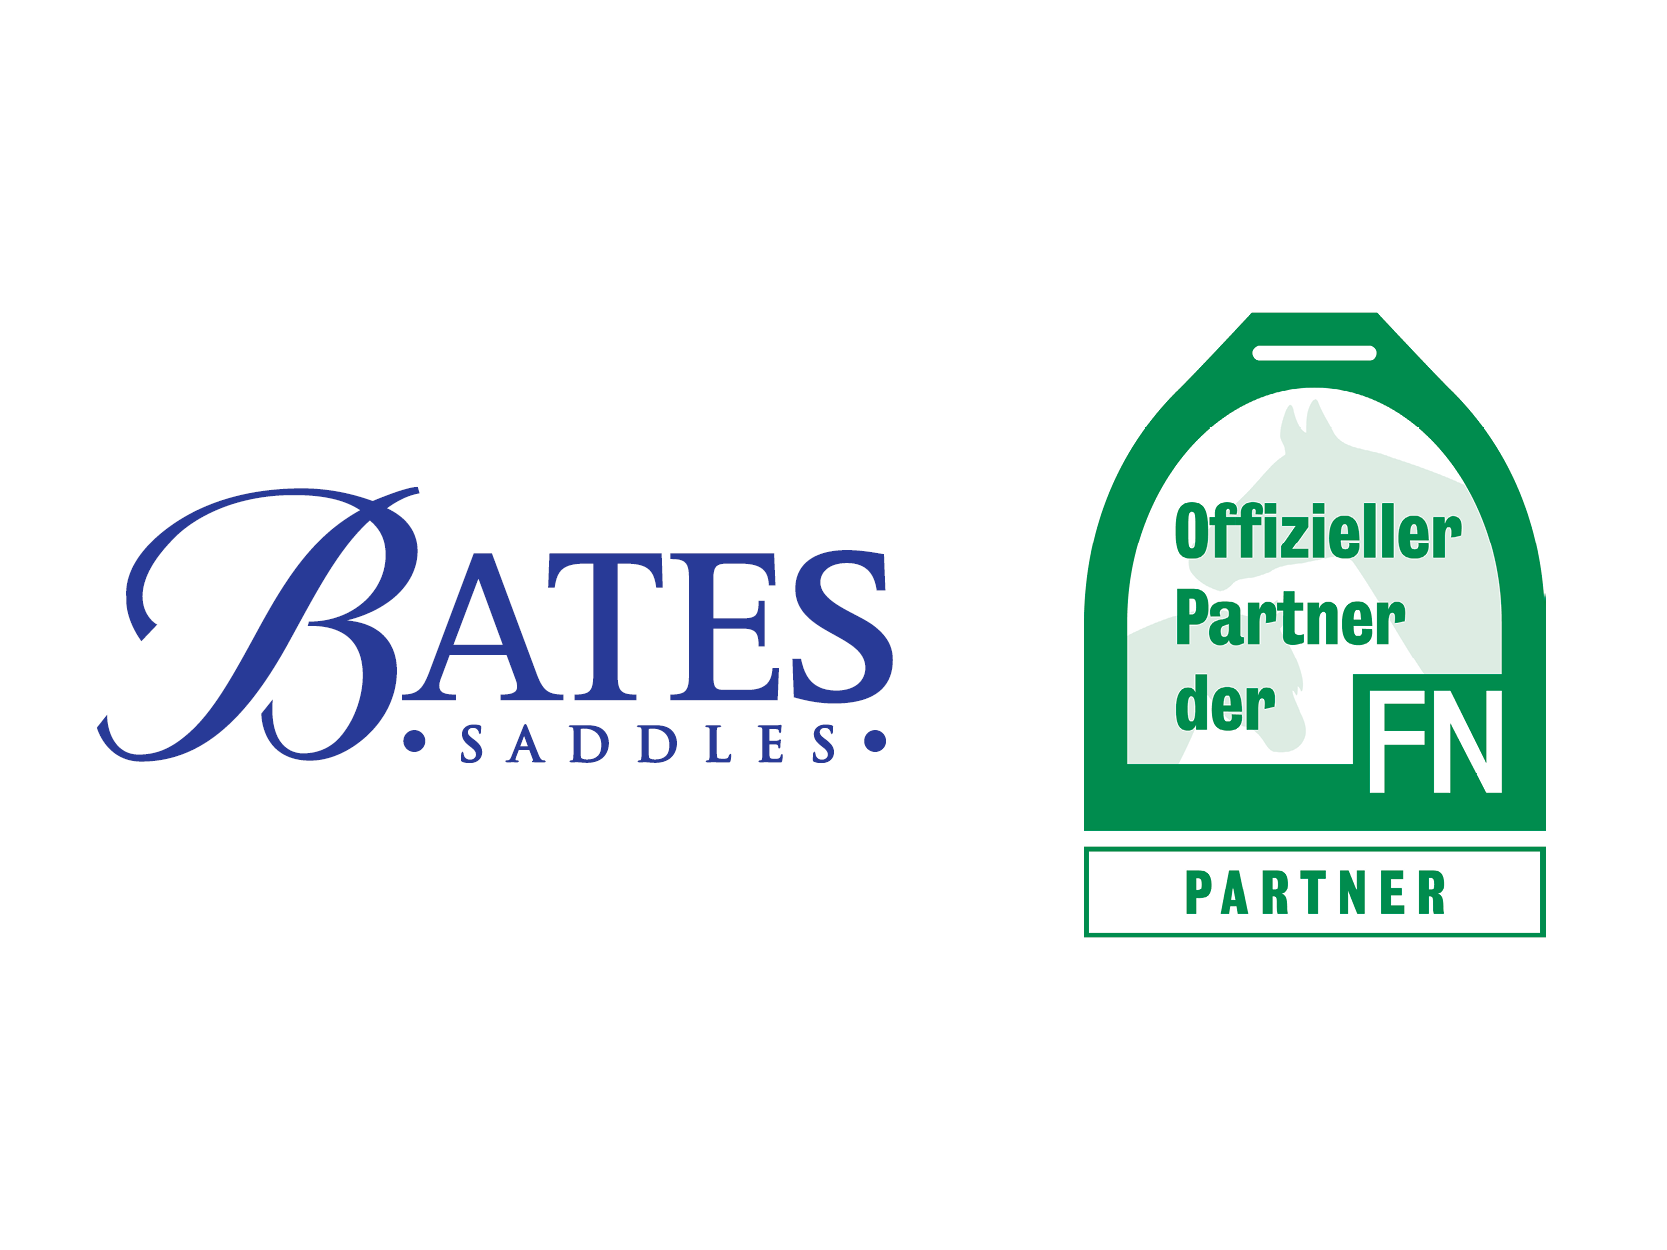 Official Partner of the German Equestrian Federation (FN)